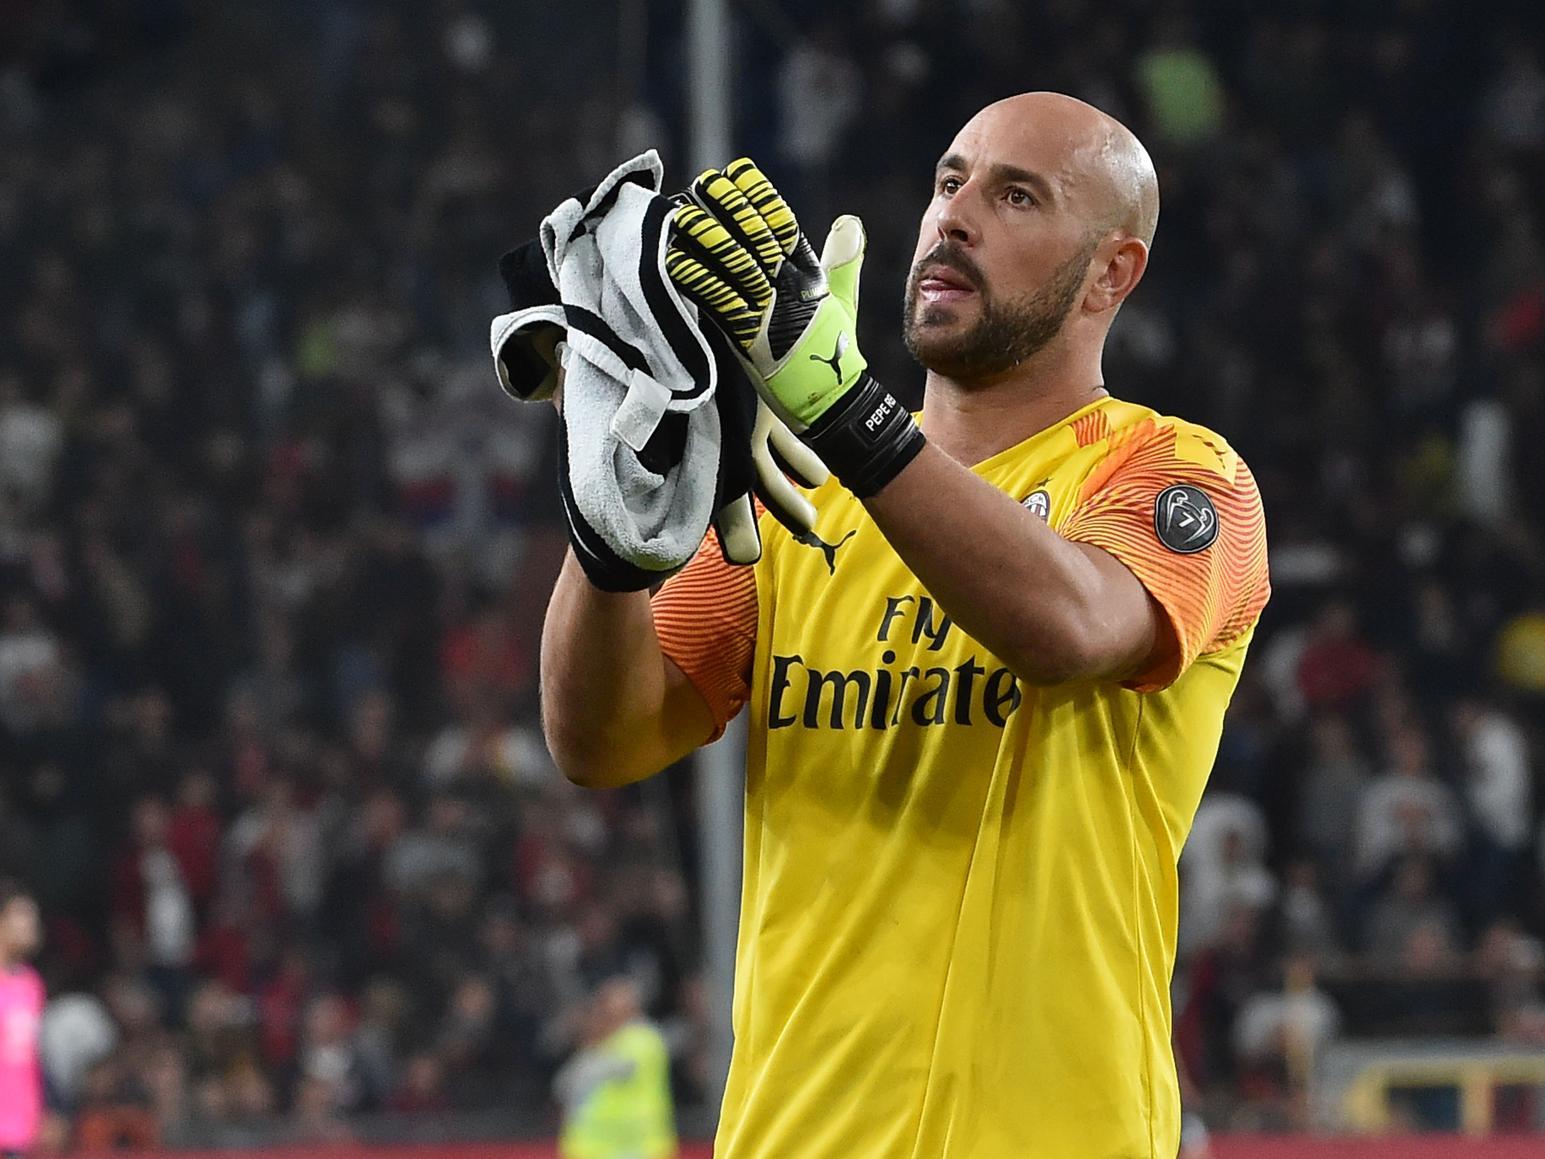 Aston Villa are being tipped for a surprise move to sign former Liverpool keeper Pepe Reina. (Daily Mail)